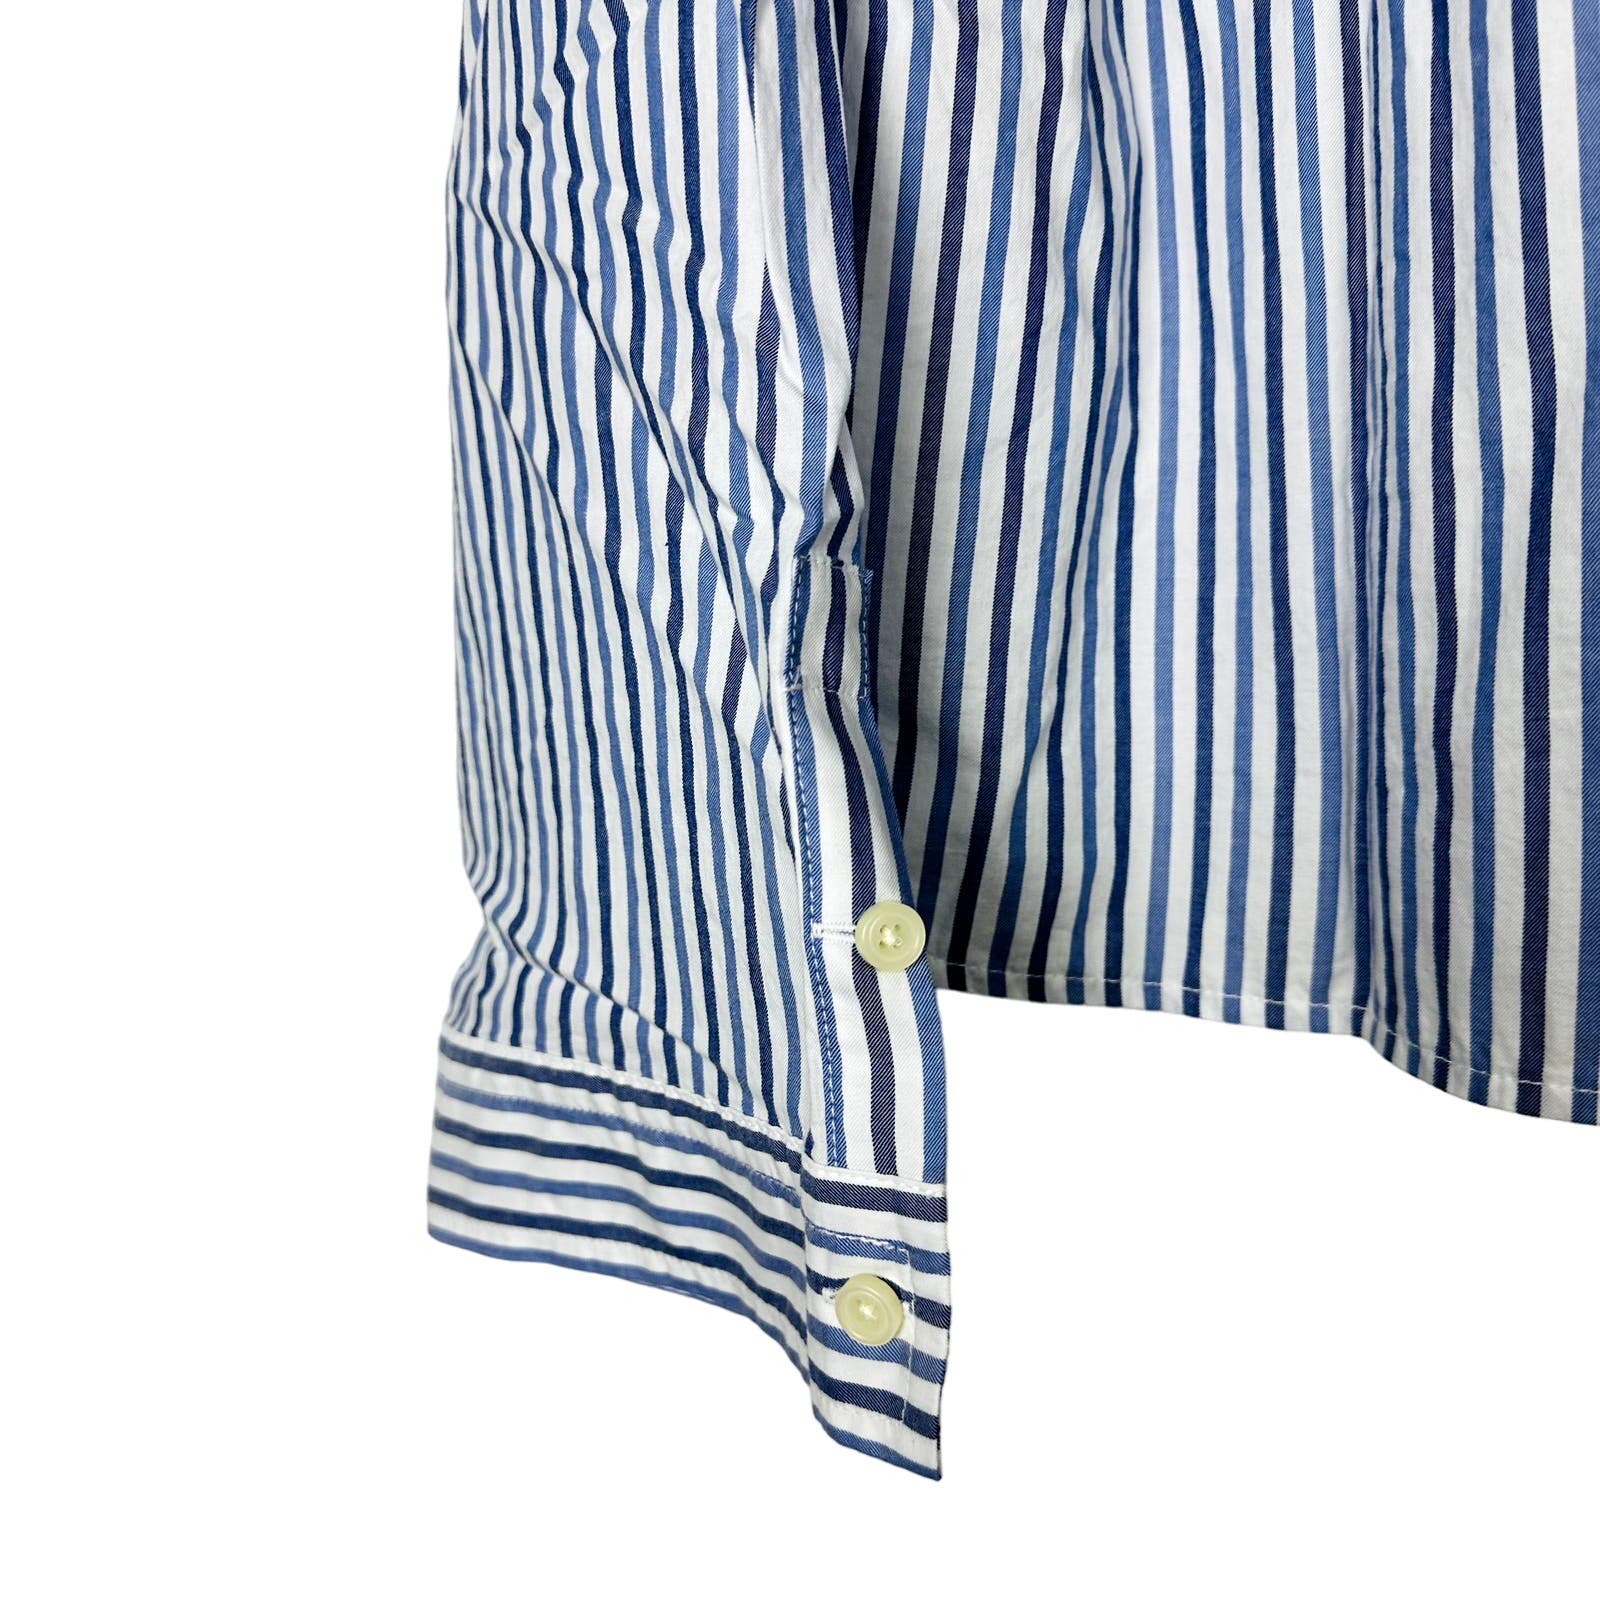 Everlane NWT The Woven P.J. Longsleeve Button Front Striped Top Blue White Size Medium